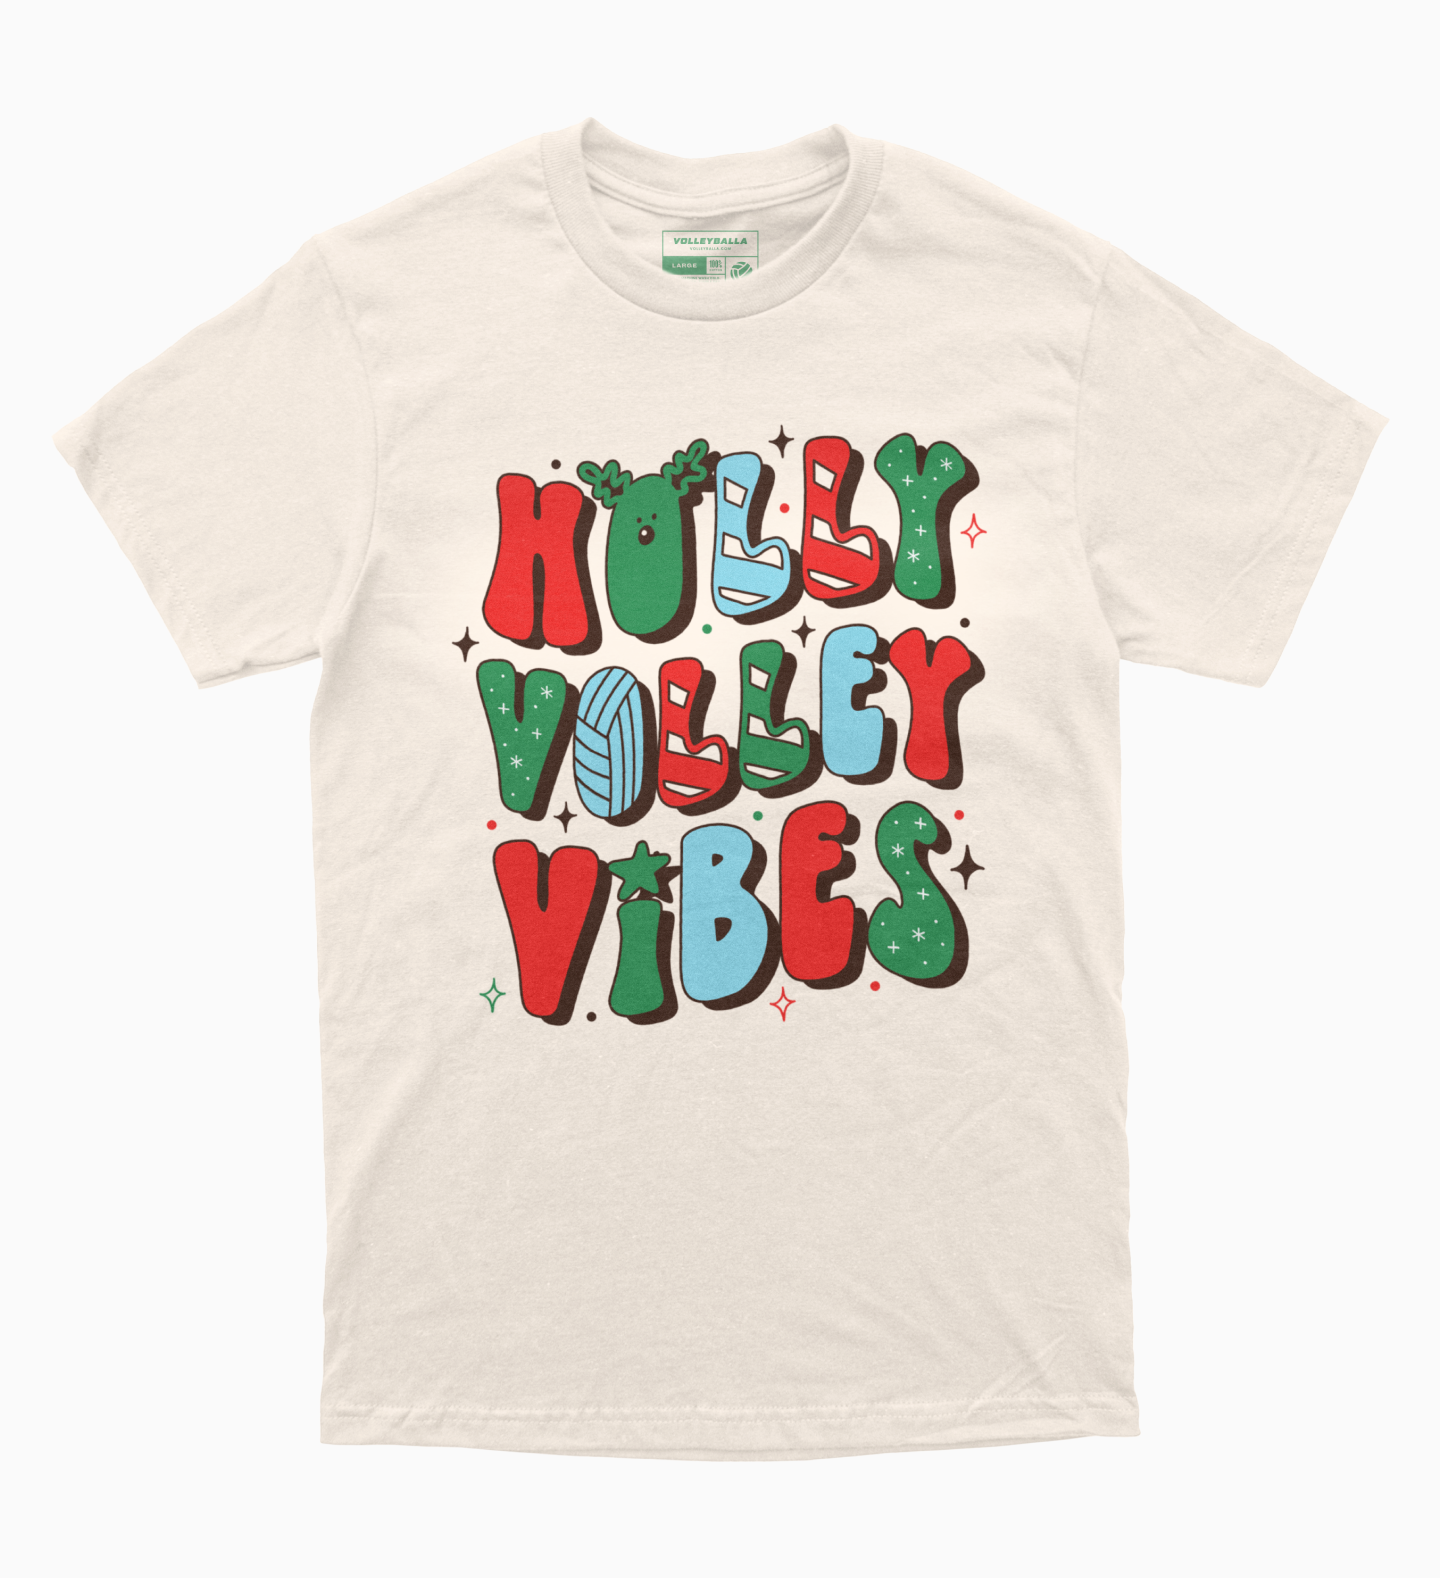 Holly Volley Vibes - Volleyball T-Shirt